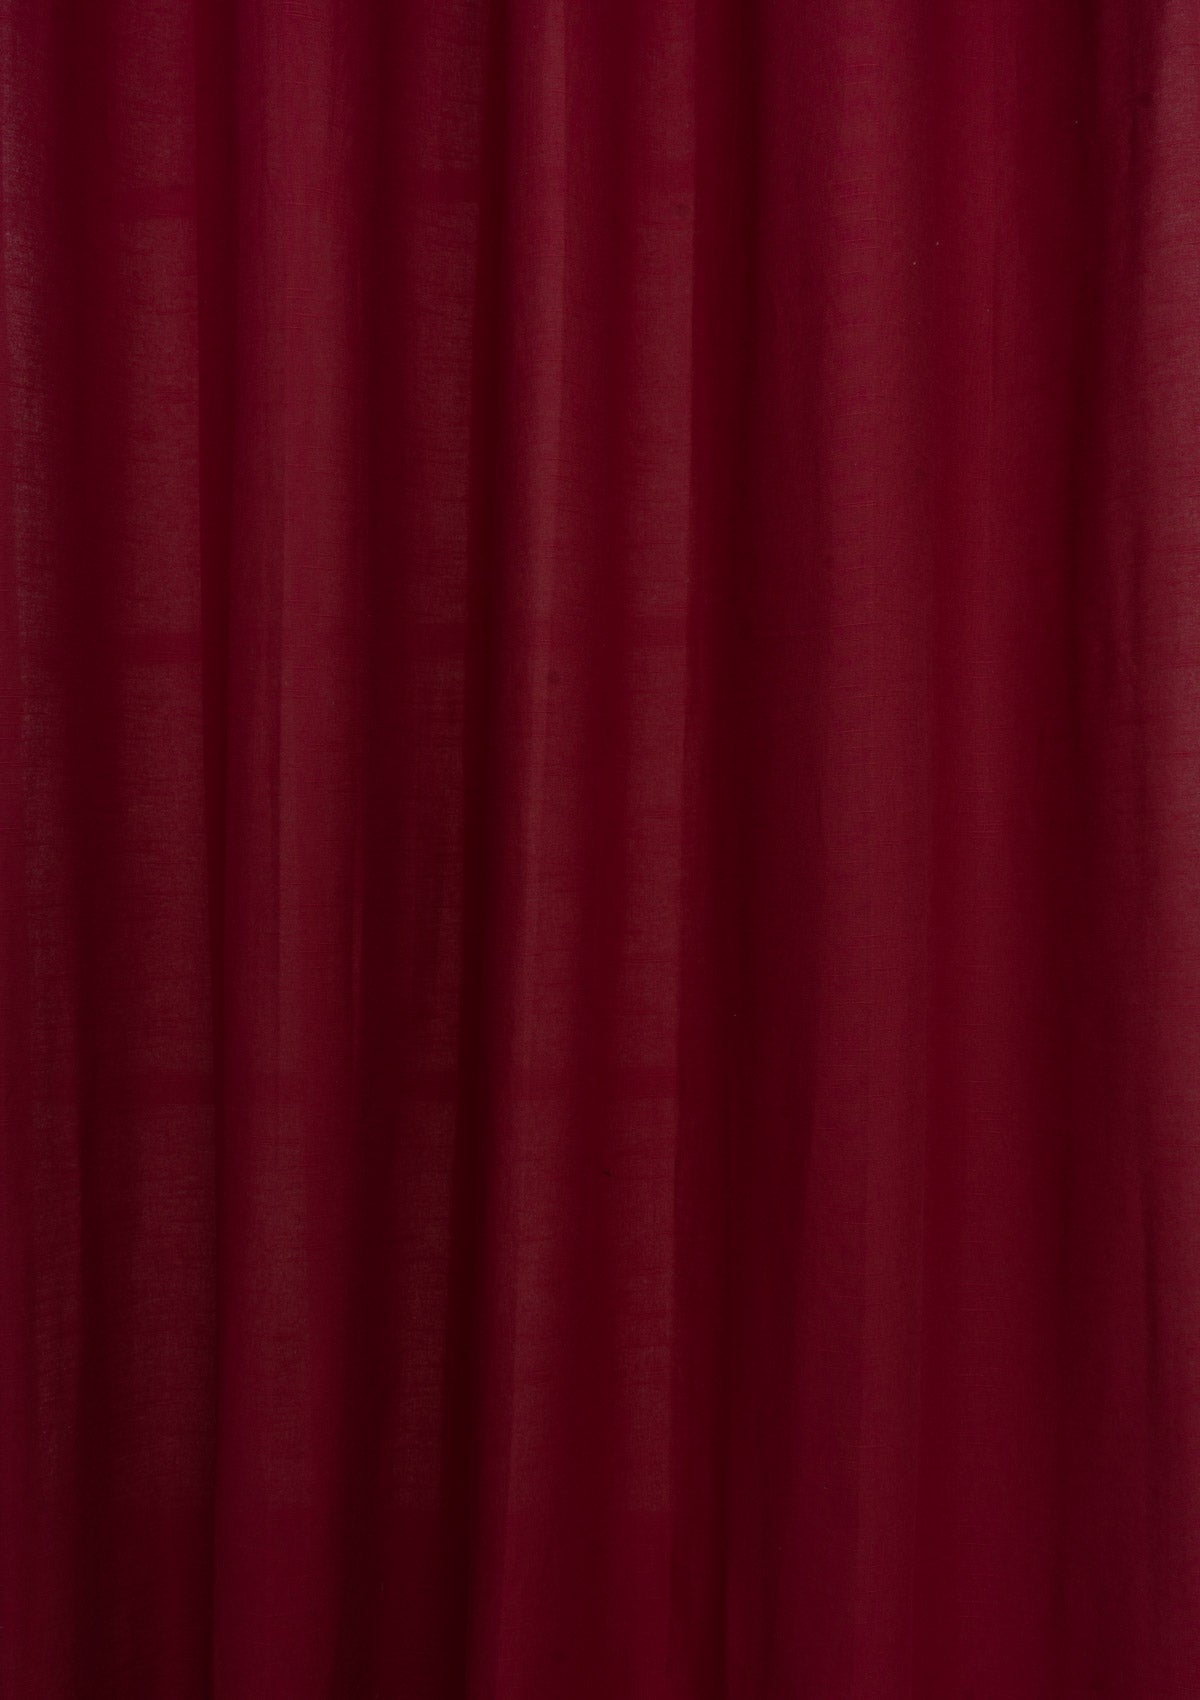 Solid Wine red 100% Customizable Cotton plain curtain for bedroom - Room darkening